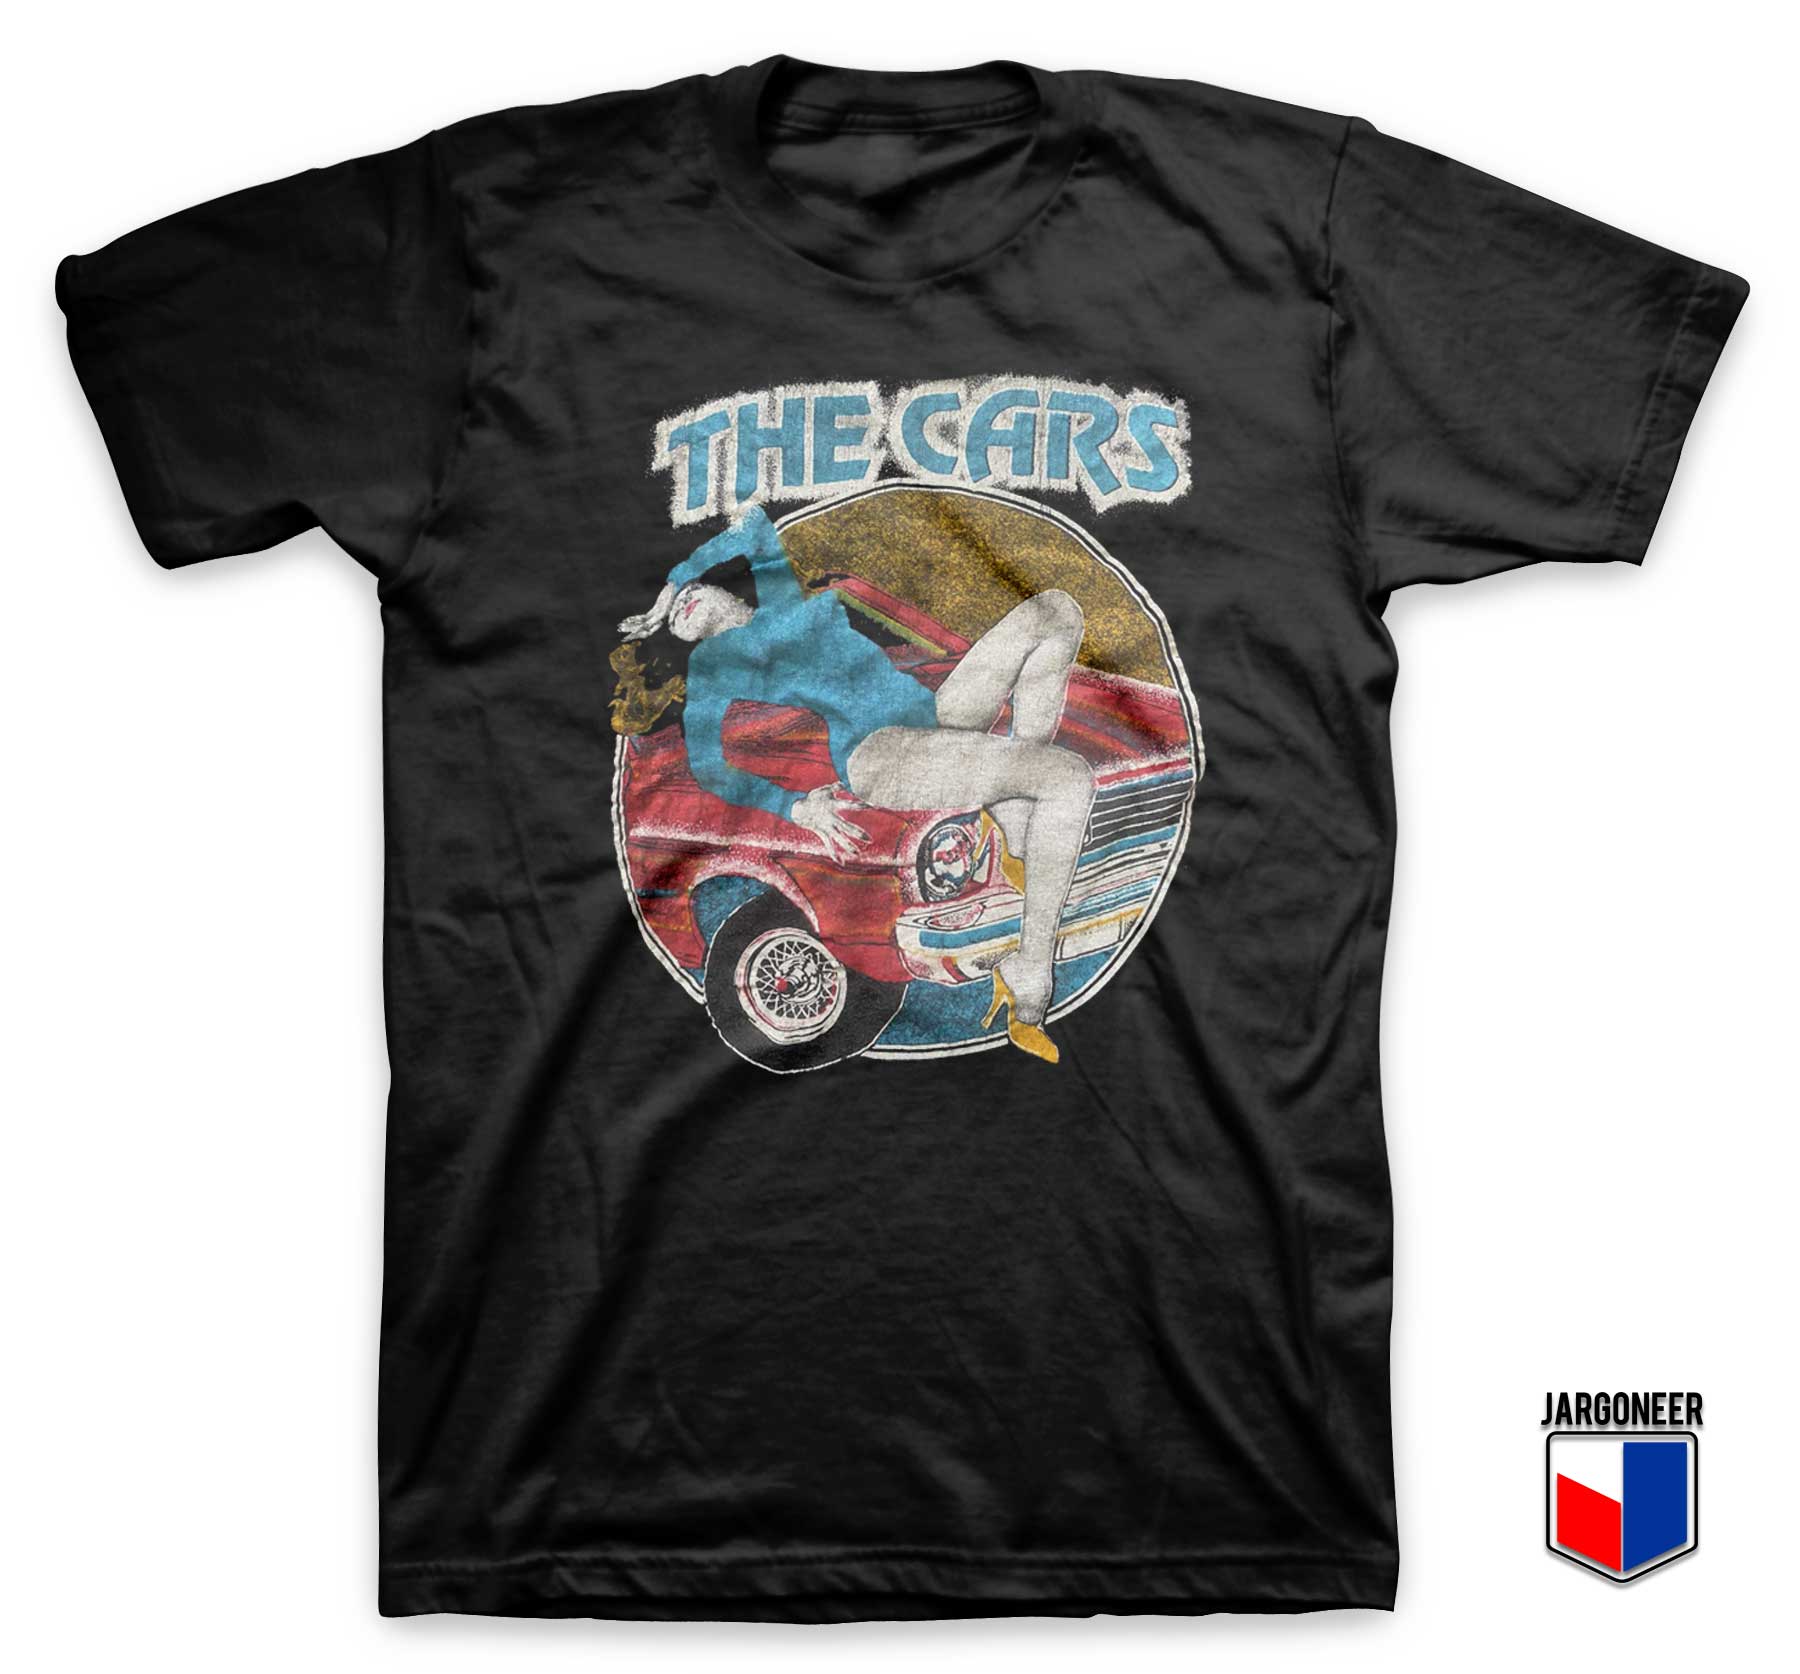 Vintage 70s The Cars band S Candy o New Wave Punk T Shirt - Shop Unique Graphic Cool Shirt Designs